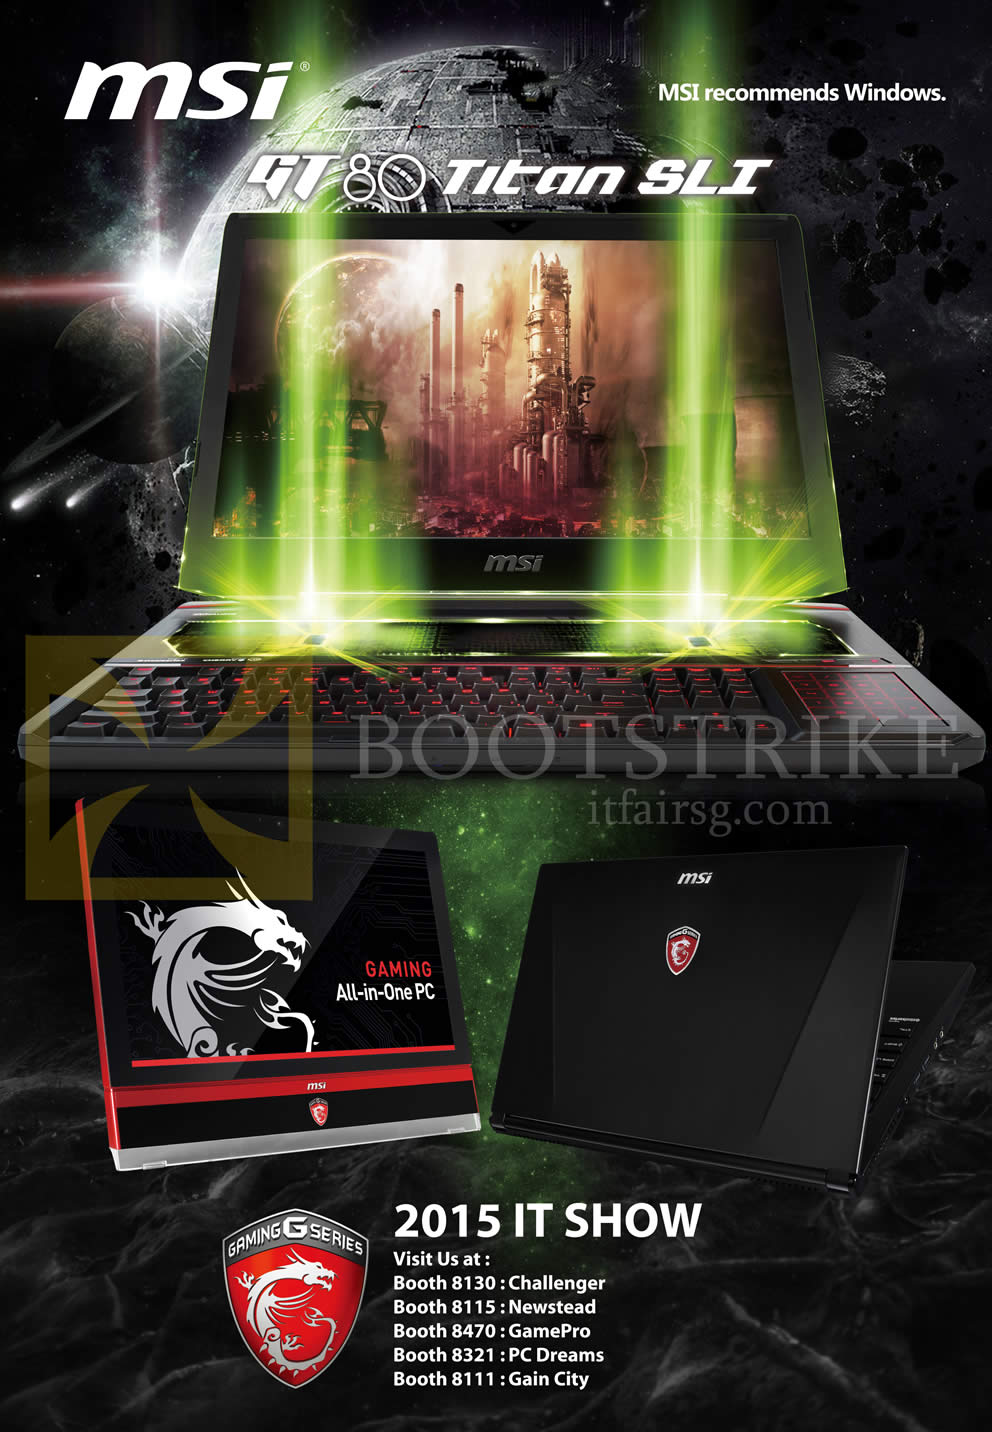 IT SHOW 2015 price list image brochure of MSI Booth Locations, GT80 Titan SLI Notebook